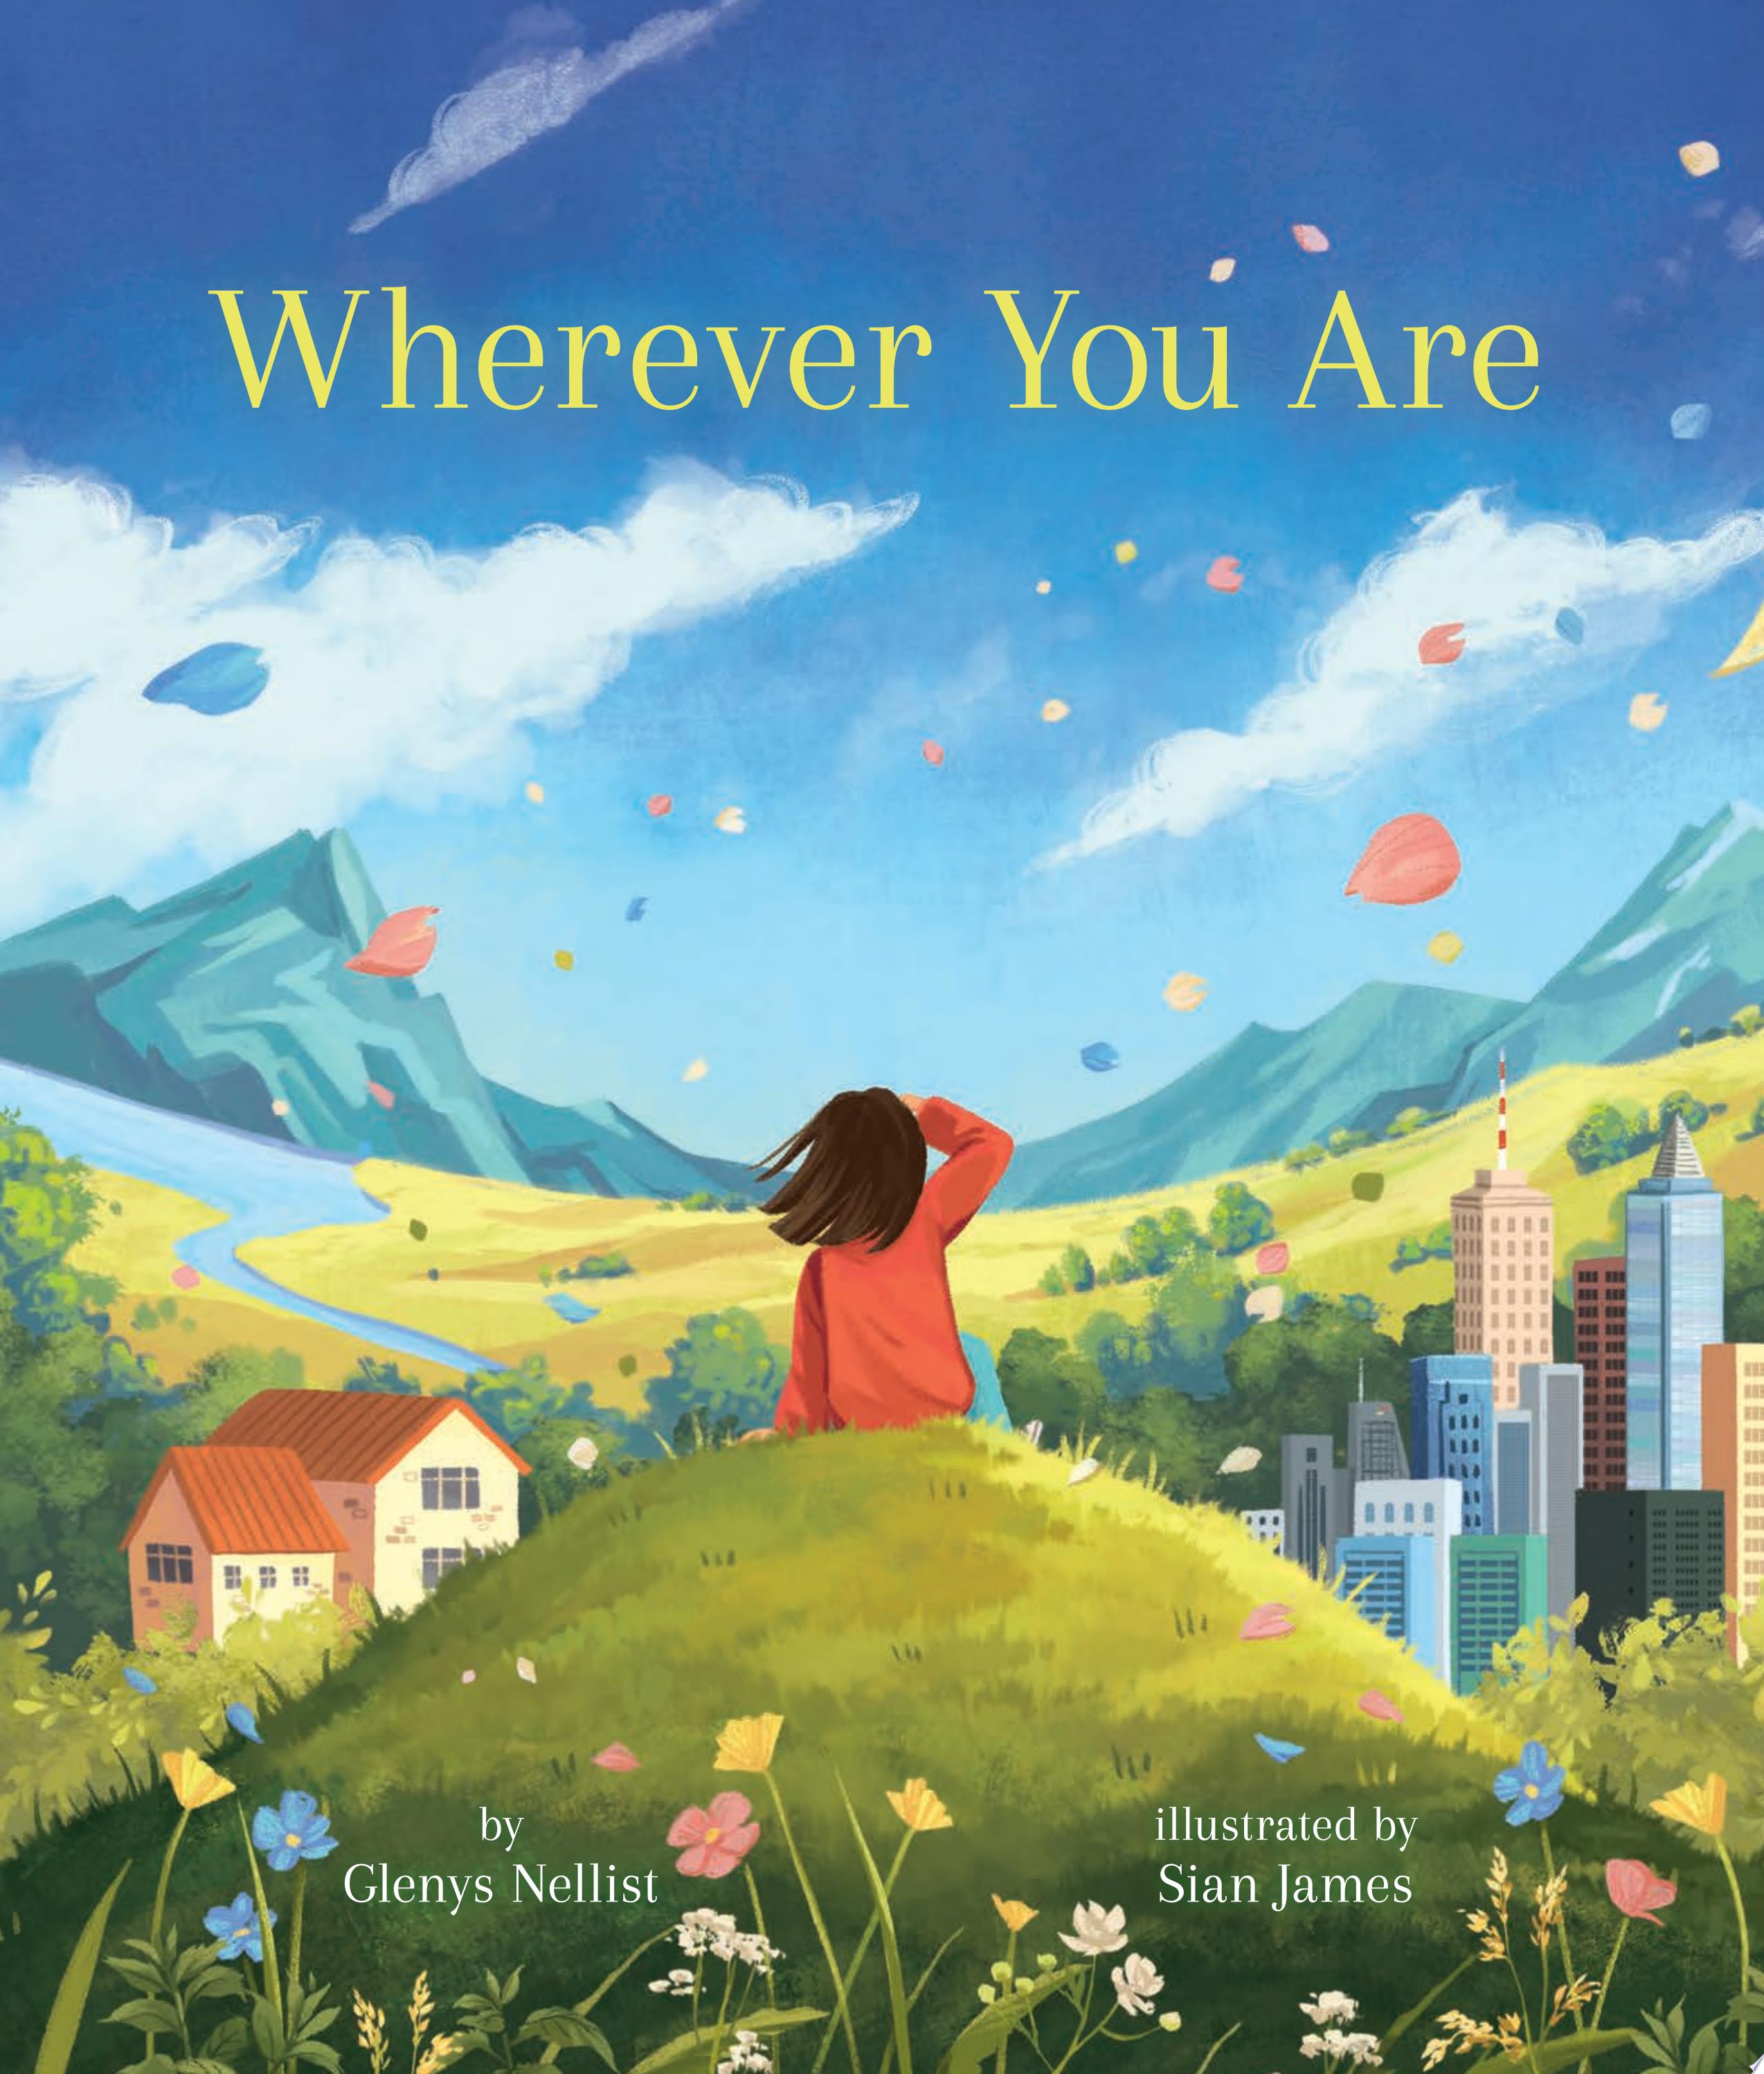 Image for "Wherever You Are"